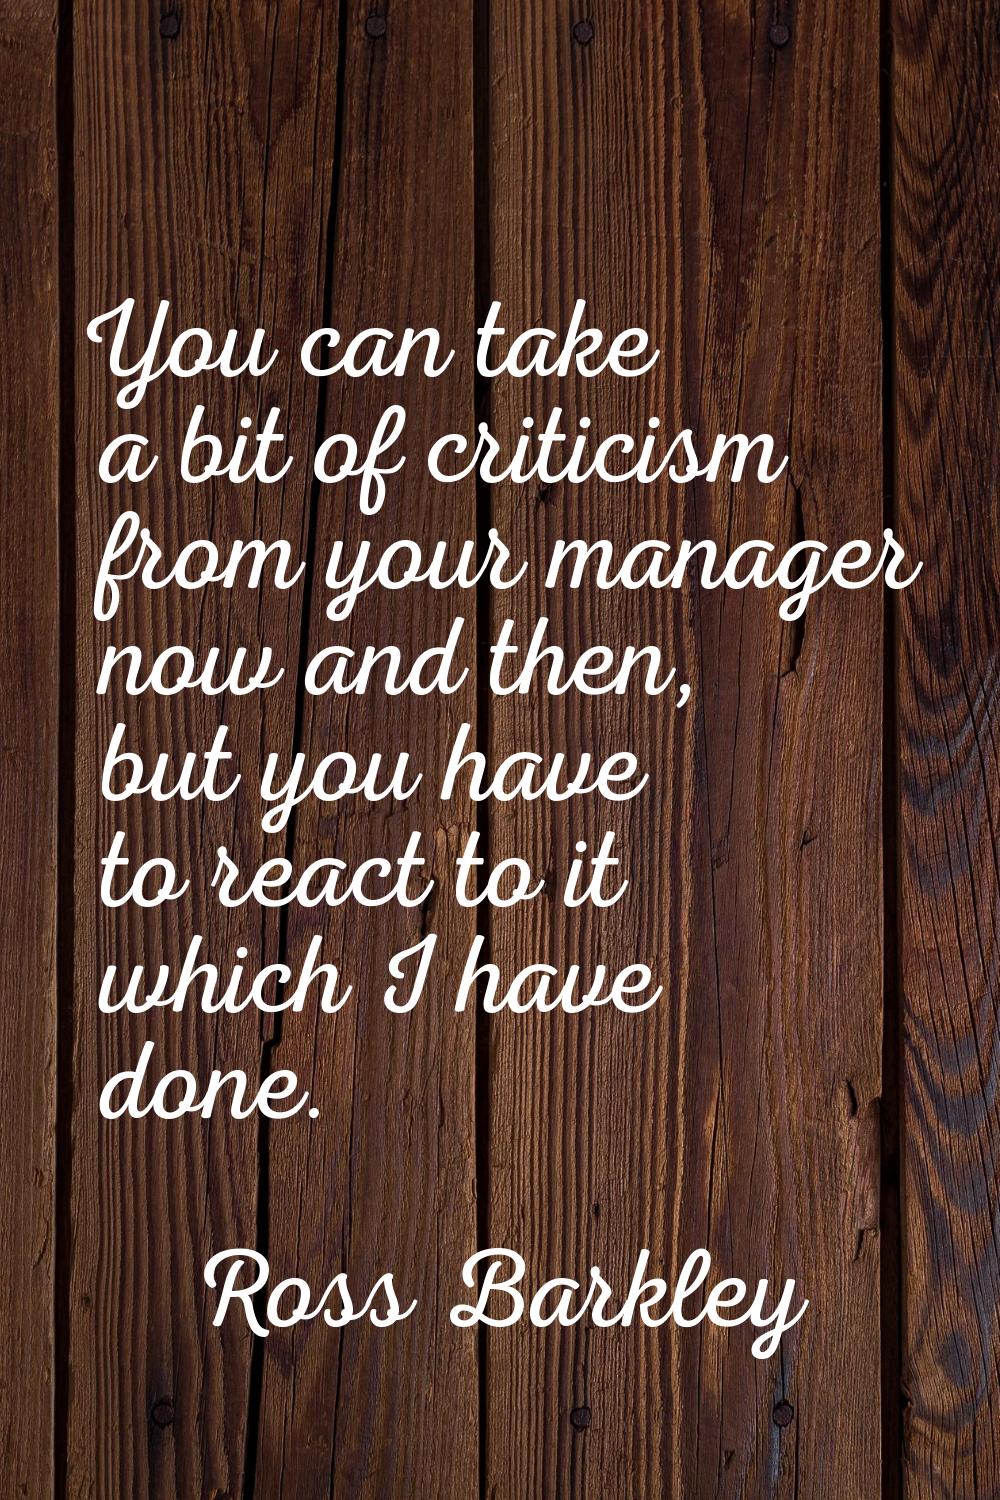 You can take a bit of criticism from your manager now and then, but you have to react to it which I